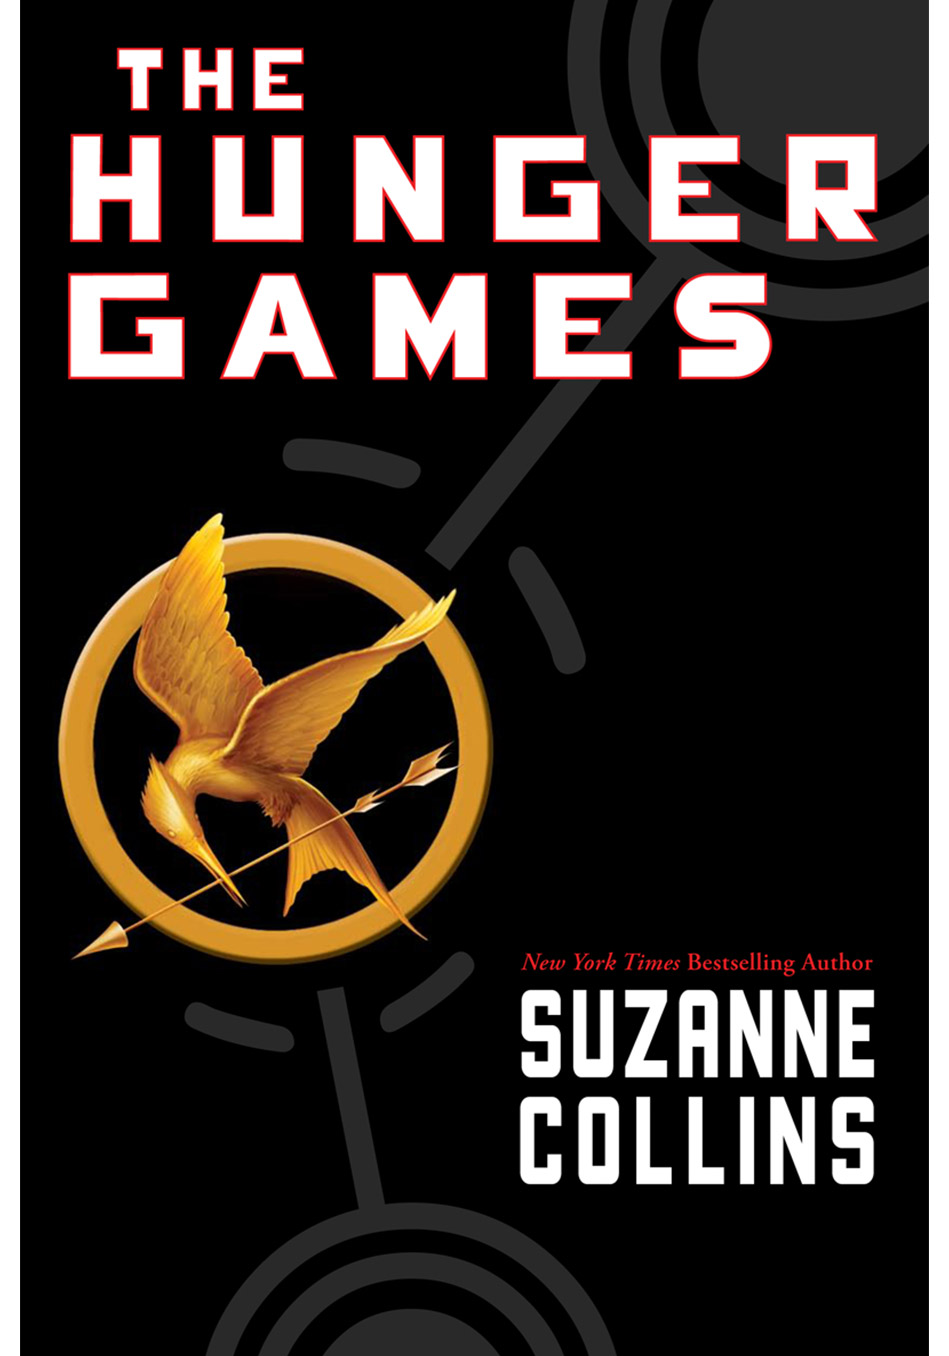 who is the author of the hunger games book